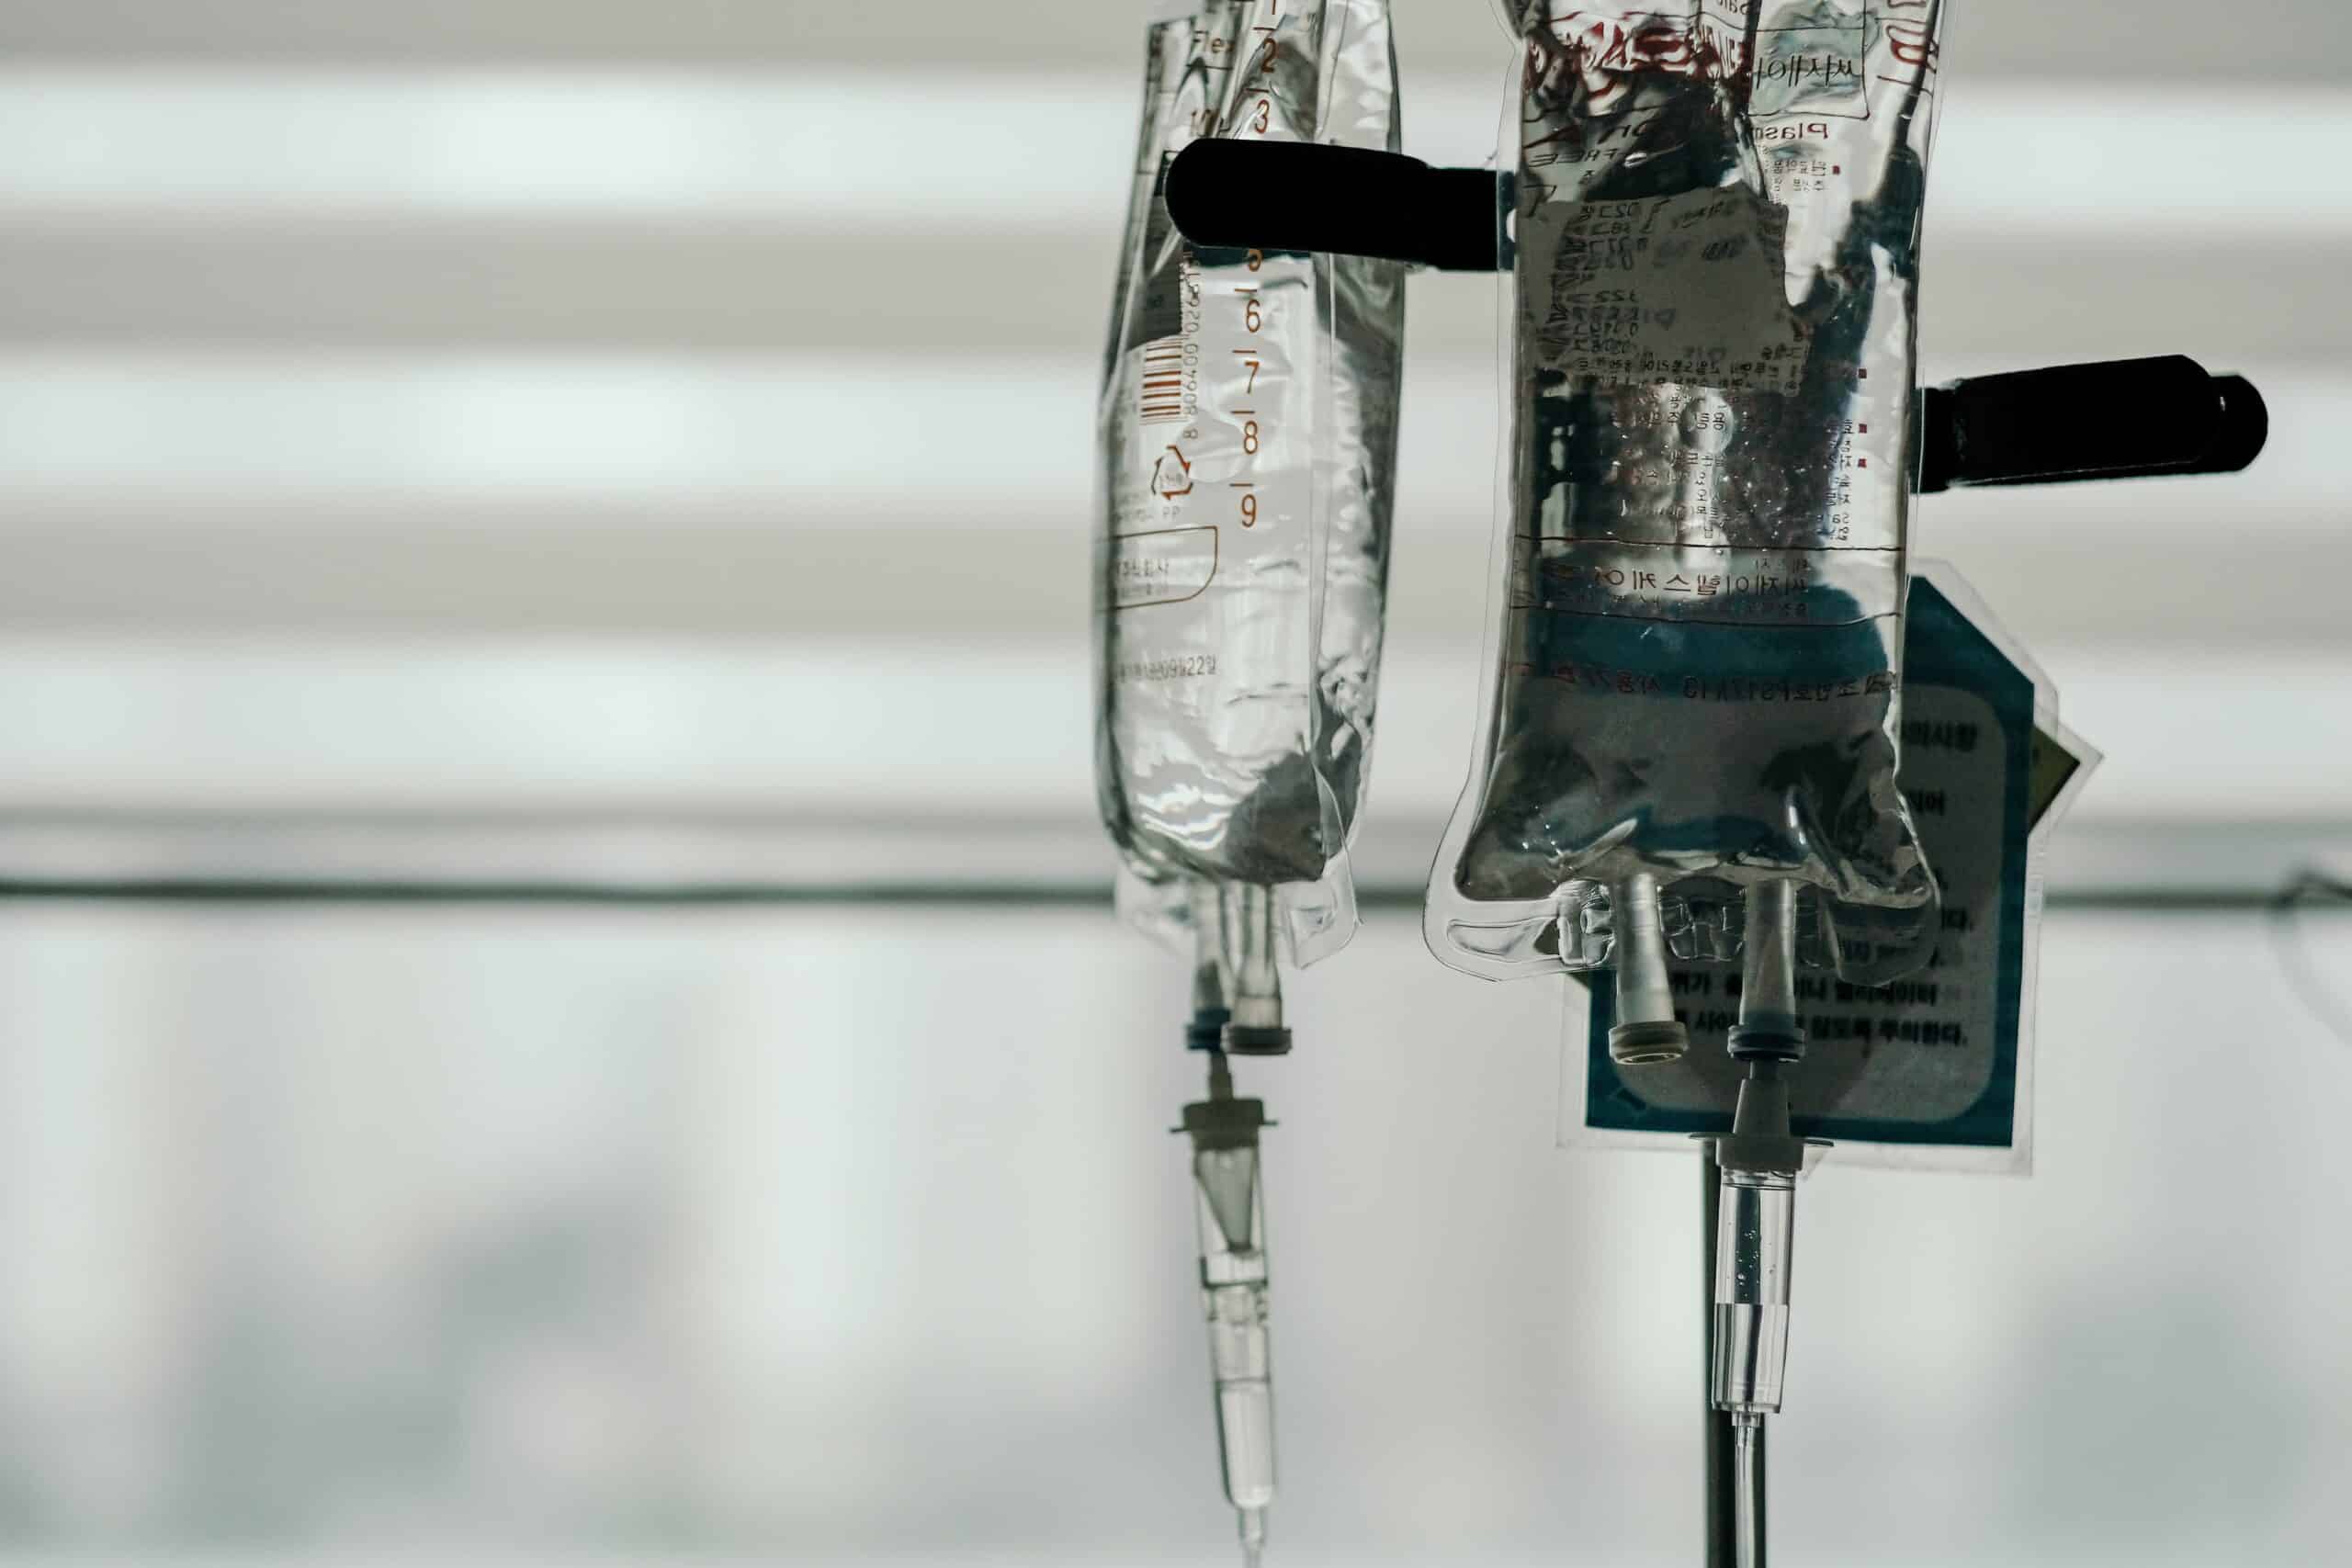 IVs in a hospital | Photo by insung yoon on Unsplash